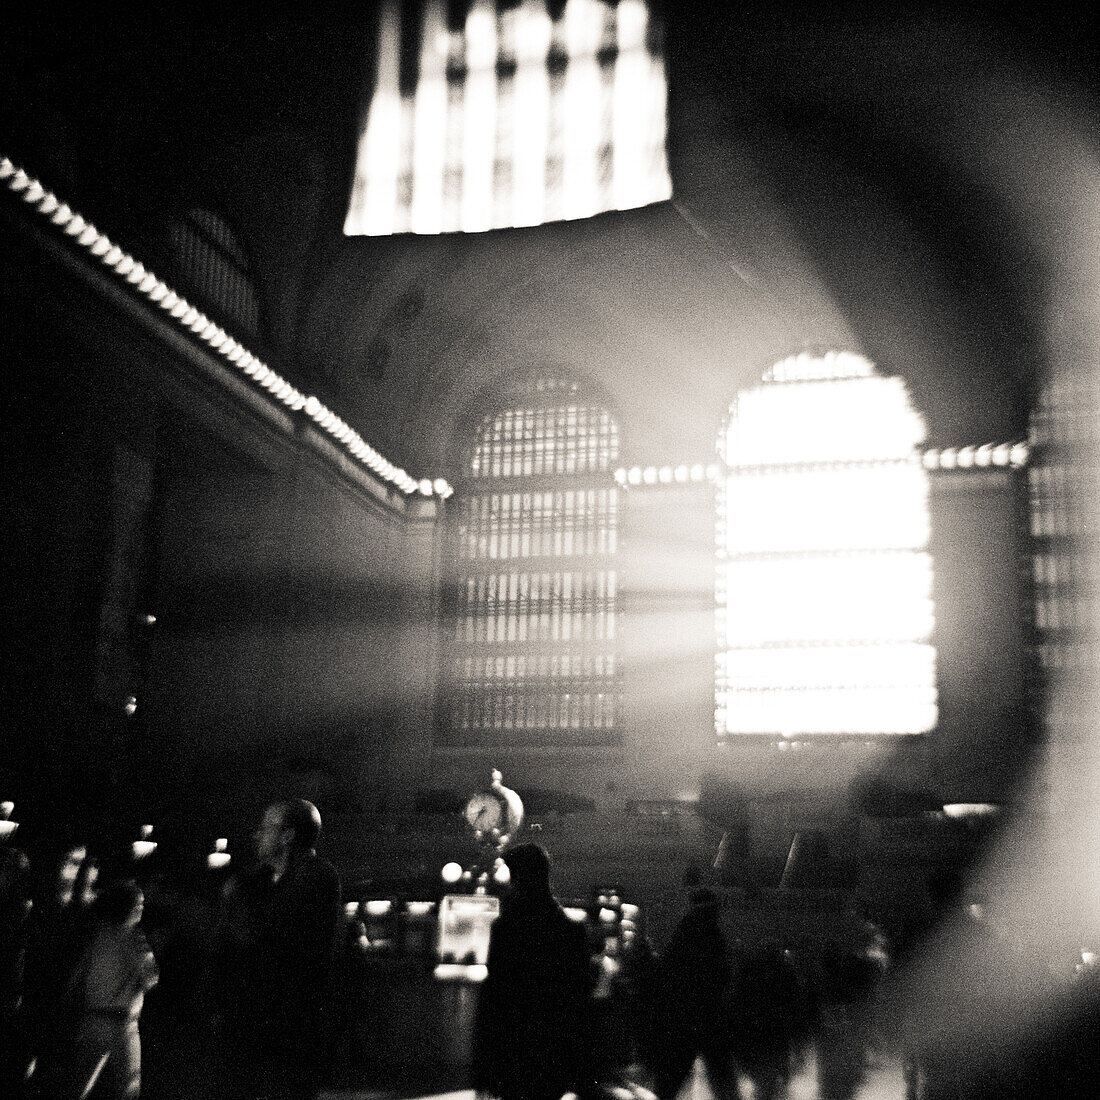 Travelers in Grand Central Terminal, New York City, USA